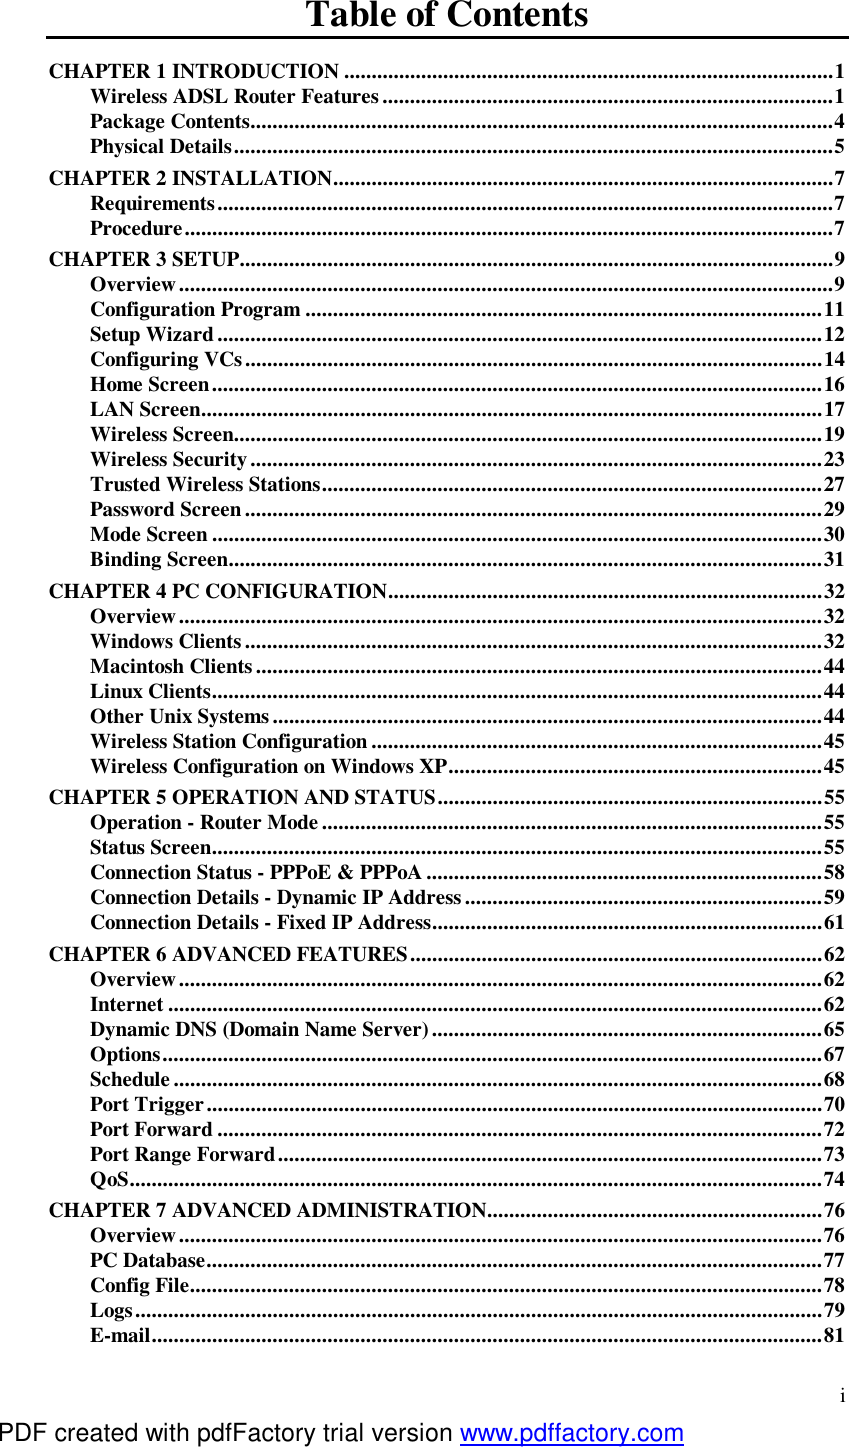  i Table of Contents CHAPTER 1 INTRODUCTION.........................................................................................1 Wireless ADSL Router Features..................................................................................1 Package Contents..........................................................................................................4 Physical Details.............................................................................................................5 CHAPTER 2 INSTALLATION...........................................................................................7 Requirements................................................................................................................7 Procedure......................................................................................................................7 CHAPTER 3 SETUP............................................................................................................9 Overview.......................................................................................................................9 Configuration Program..............................................................................................11 Setup Wizard..............................................................................................................12 Configuring VCs.........................................................................................................14 Home Screen...............................................................................................................16 LAN Screen.................................................................................................................17 Wireless Screen...........................................................................................................19 Wireless Security........................................................................................................23 Trusted Wireless Stations...........................................................................................27 Password Screen.........................................................................................................29 Mode Screen...............................................................................................................30 Binding Screen............................................................................................................31 CHAPTER 4 PC CONFIGURATION...............................................................................32 Overview.....................................................................................................................32 Windows Clients.........................................................................................................32 Macintosh Clients.......................................................................................................44 Linux Clients...............................................................................................................44 Other Unix Systems....................................................................................................44 Wireless Station Configuration..................................................................................45 Wireless Configuration on Windows XP....................................................................45 CHAPTER 5 OPERATION AND STATUS......................................................................55 Operation - Router Mode...........................................................................................55 Status Screen...............................................................................................................55 Connection Status - PPPoE &amp; PPPoA........................................................................58 Connection Details - Dynamic IP Address.................................................................59 Connection Details - Fixed IP Address.......................................................................61 CHAPTER 6 ADVANCED FEATURES...........................................................................62 Overview.....................................................................................................................62 Internet.......................................................................................................................62 Dynamic DNS (Domain Name Server).......................................................................65 Options........................................................................................................................67 Schedule......................................................................................................................68 Port Trigger................................................................................................................70 Port Forward..............................................................................................................72 Port Range Forward...................................................................................................73 QoS..............................................................................................................................74 CHAPTER 7 ADVANCED ADMINISTRATION.............................................................76 Overview.....................................................................................................................76 PC Database................................................................................................................77 Config File...................................................................................................................78 Logs.............................................................................................................................79 E-mail..........................................................................................................................81 PDF created with pdfFactory trial version www.pdffactory.com